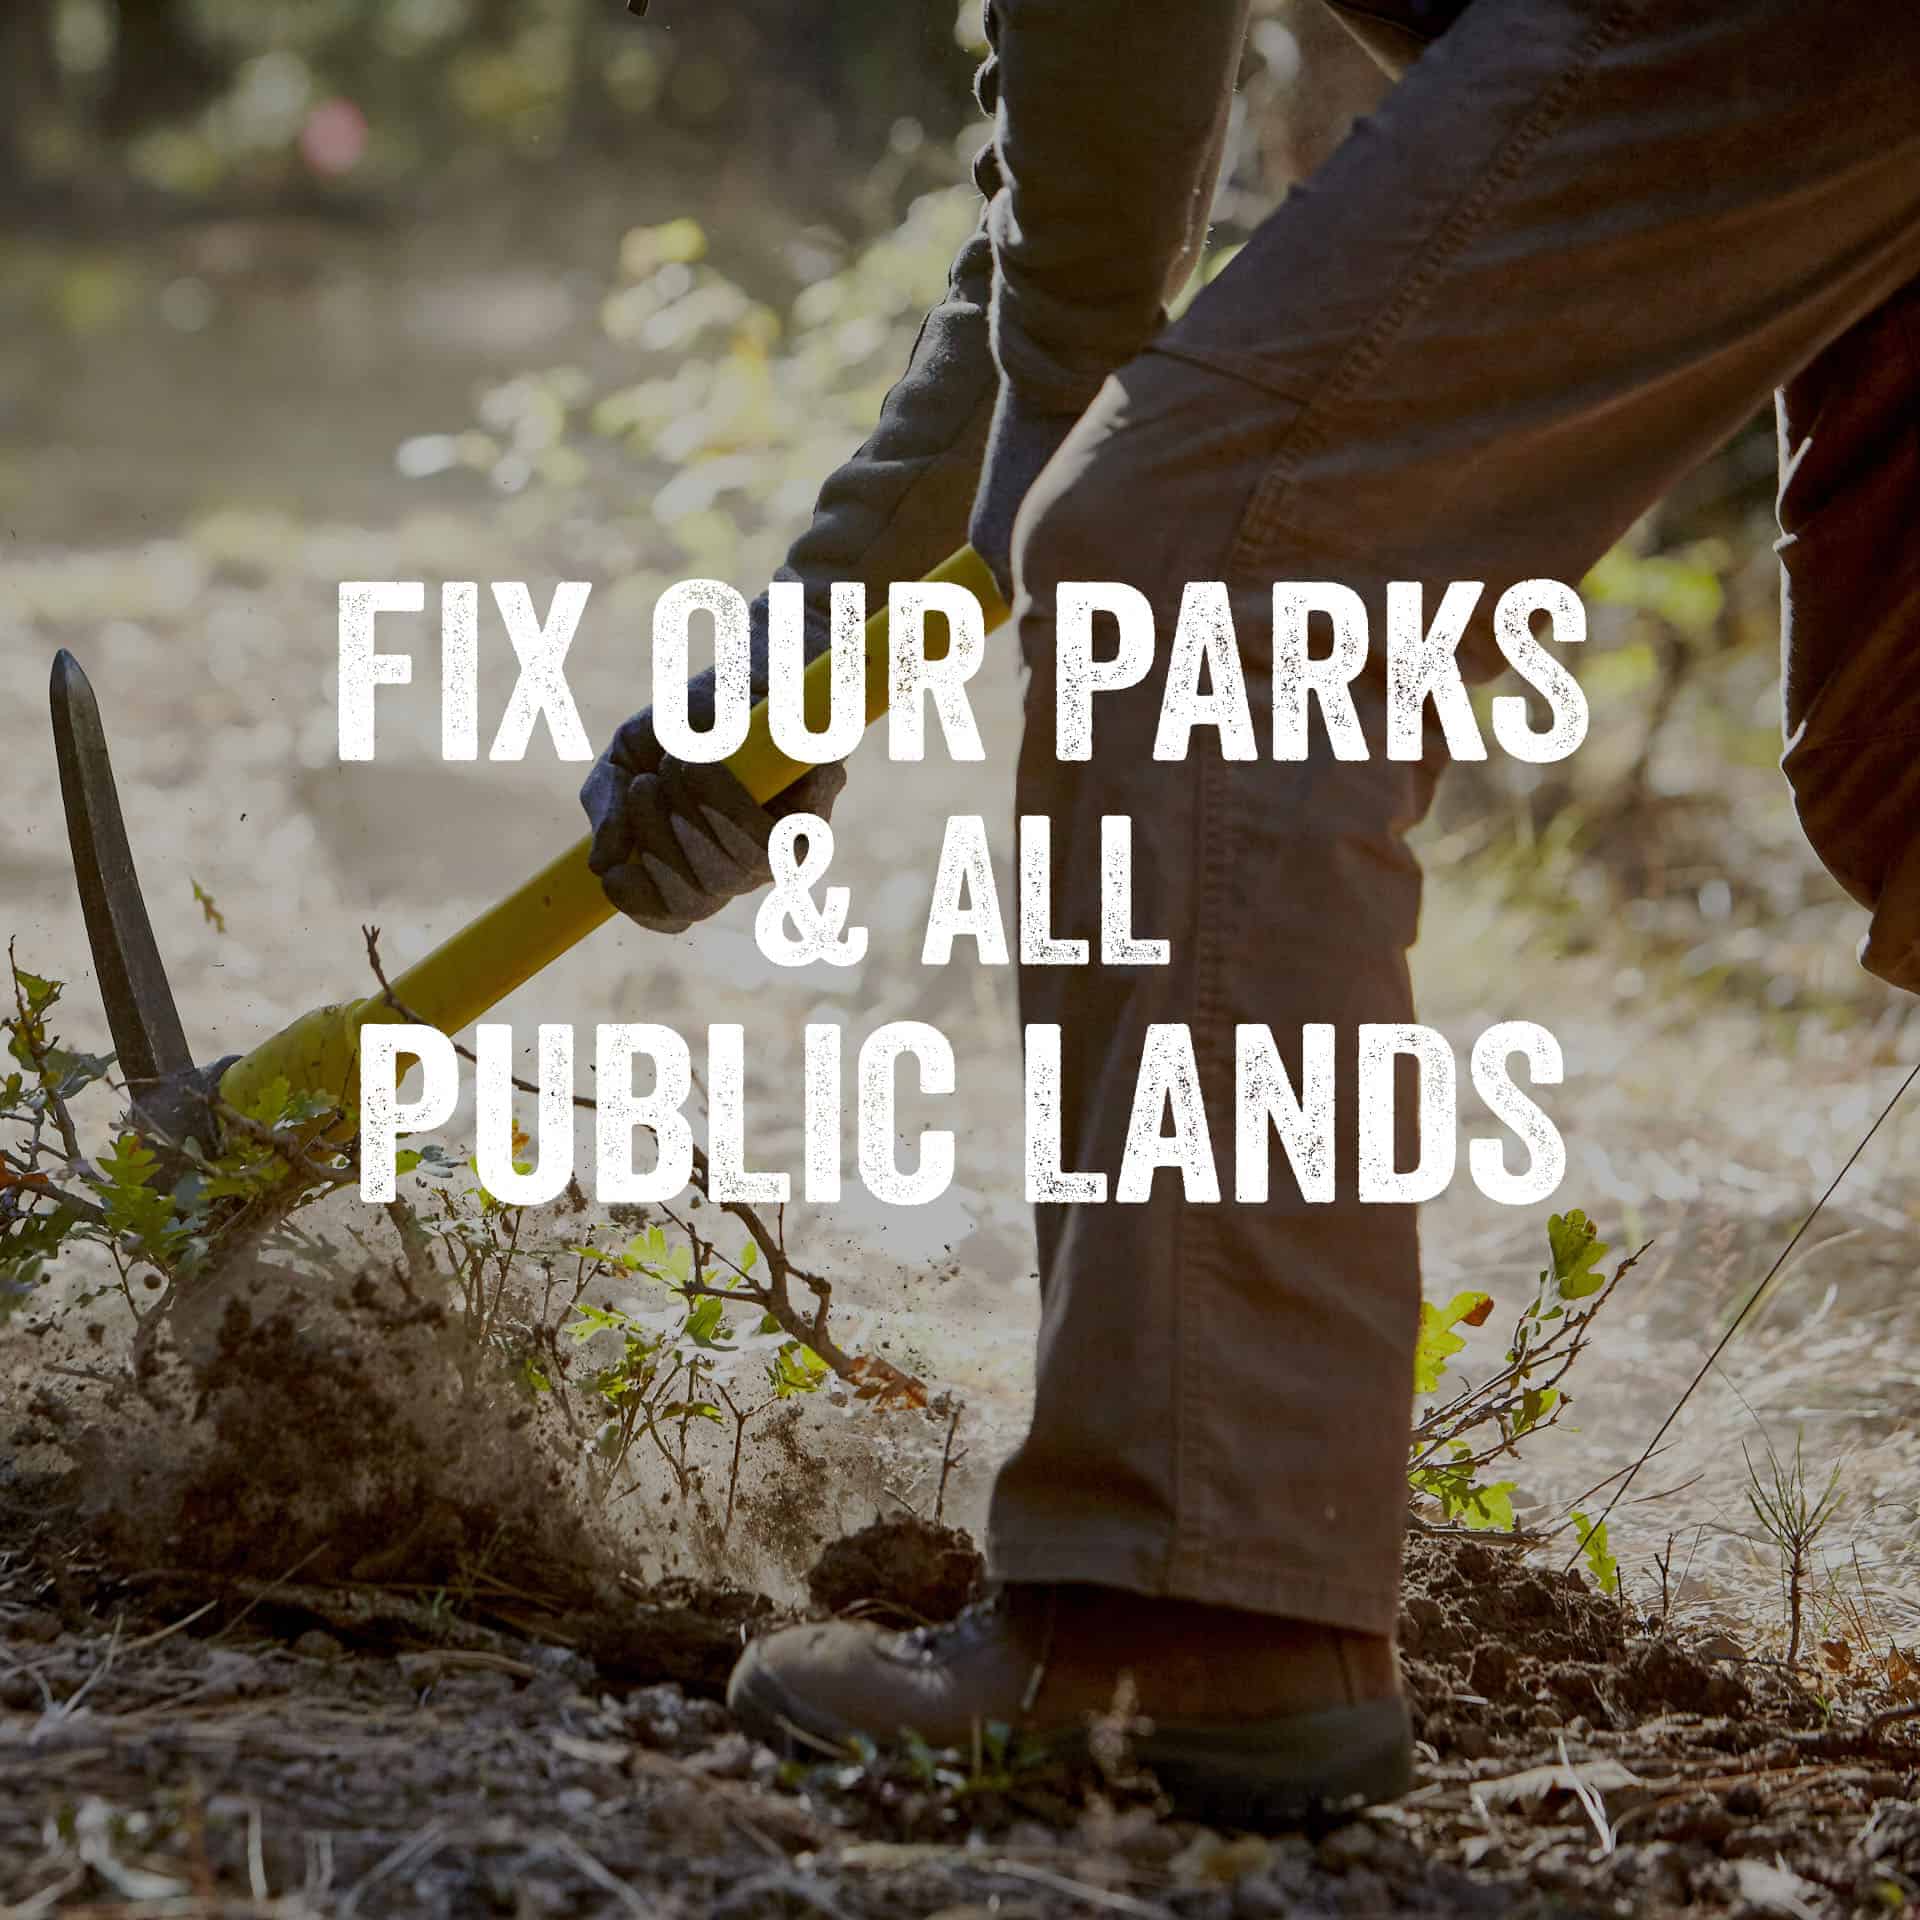 Fix Our Parks and All Public Lands Text. Image of volunteer doing trail work.